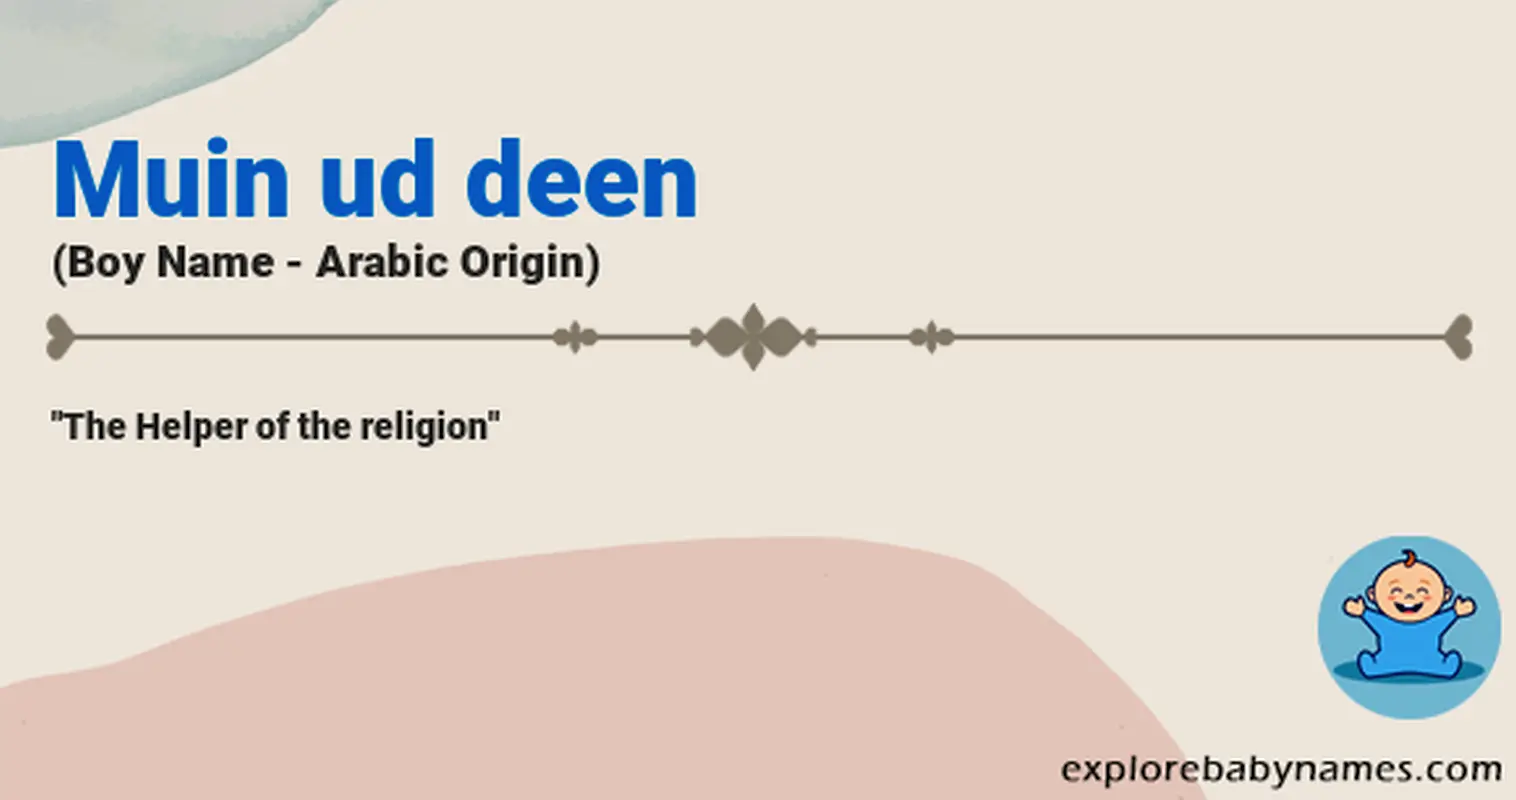 Meaning of Muin ud deen